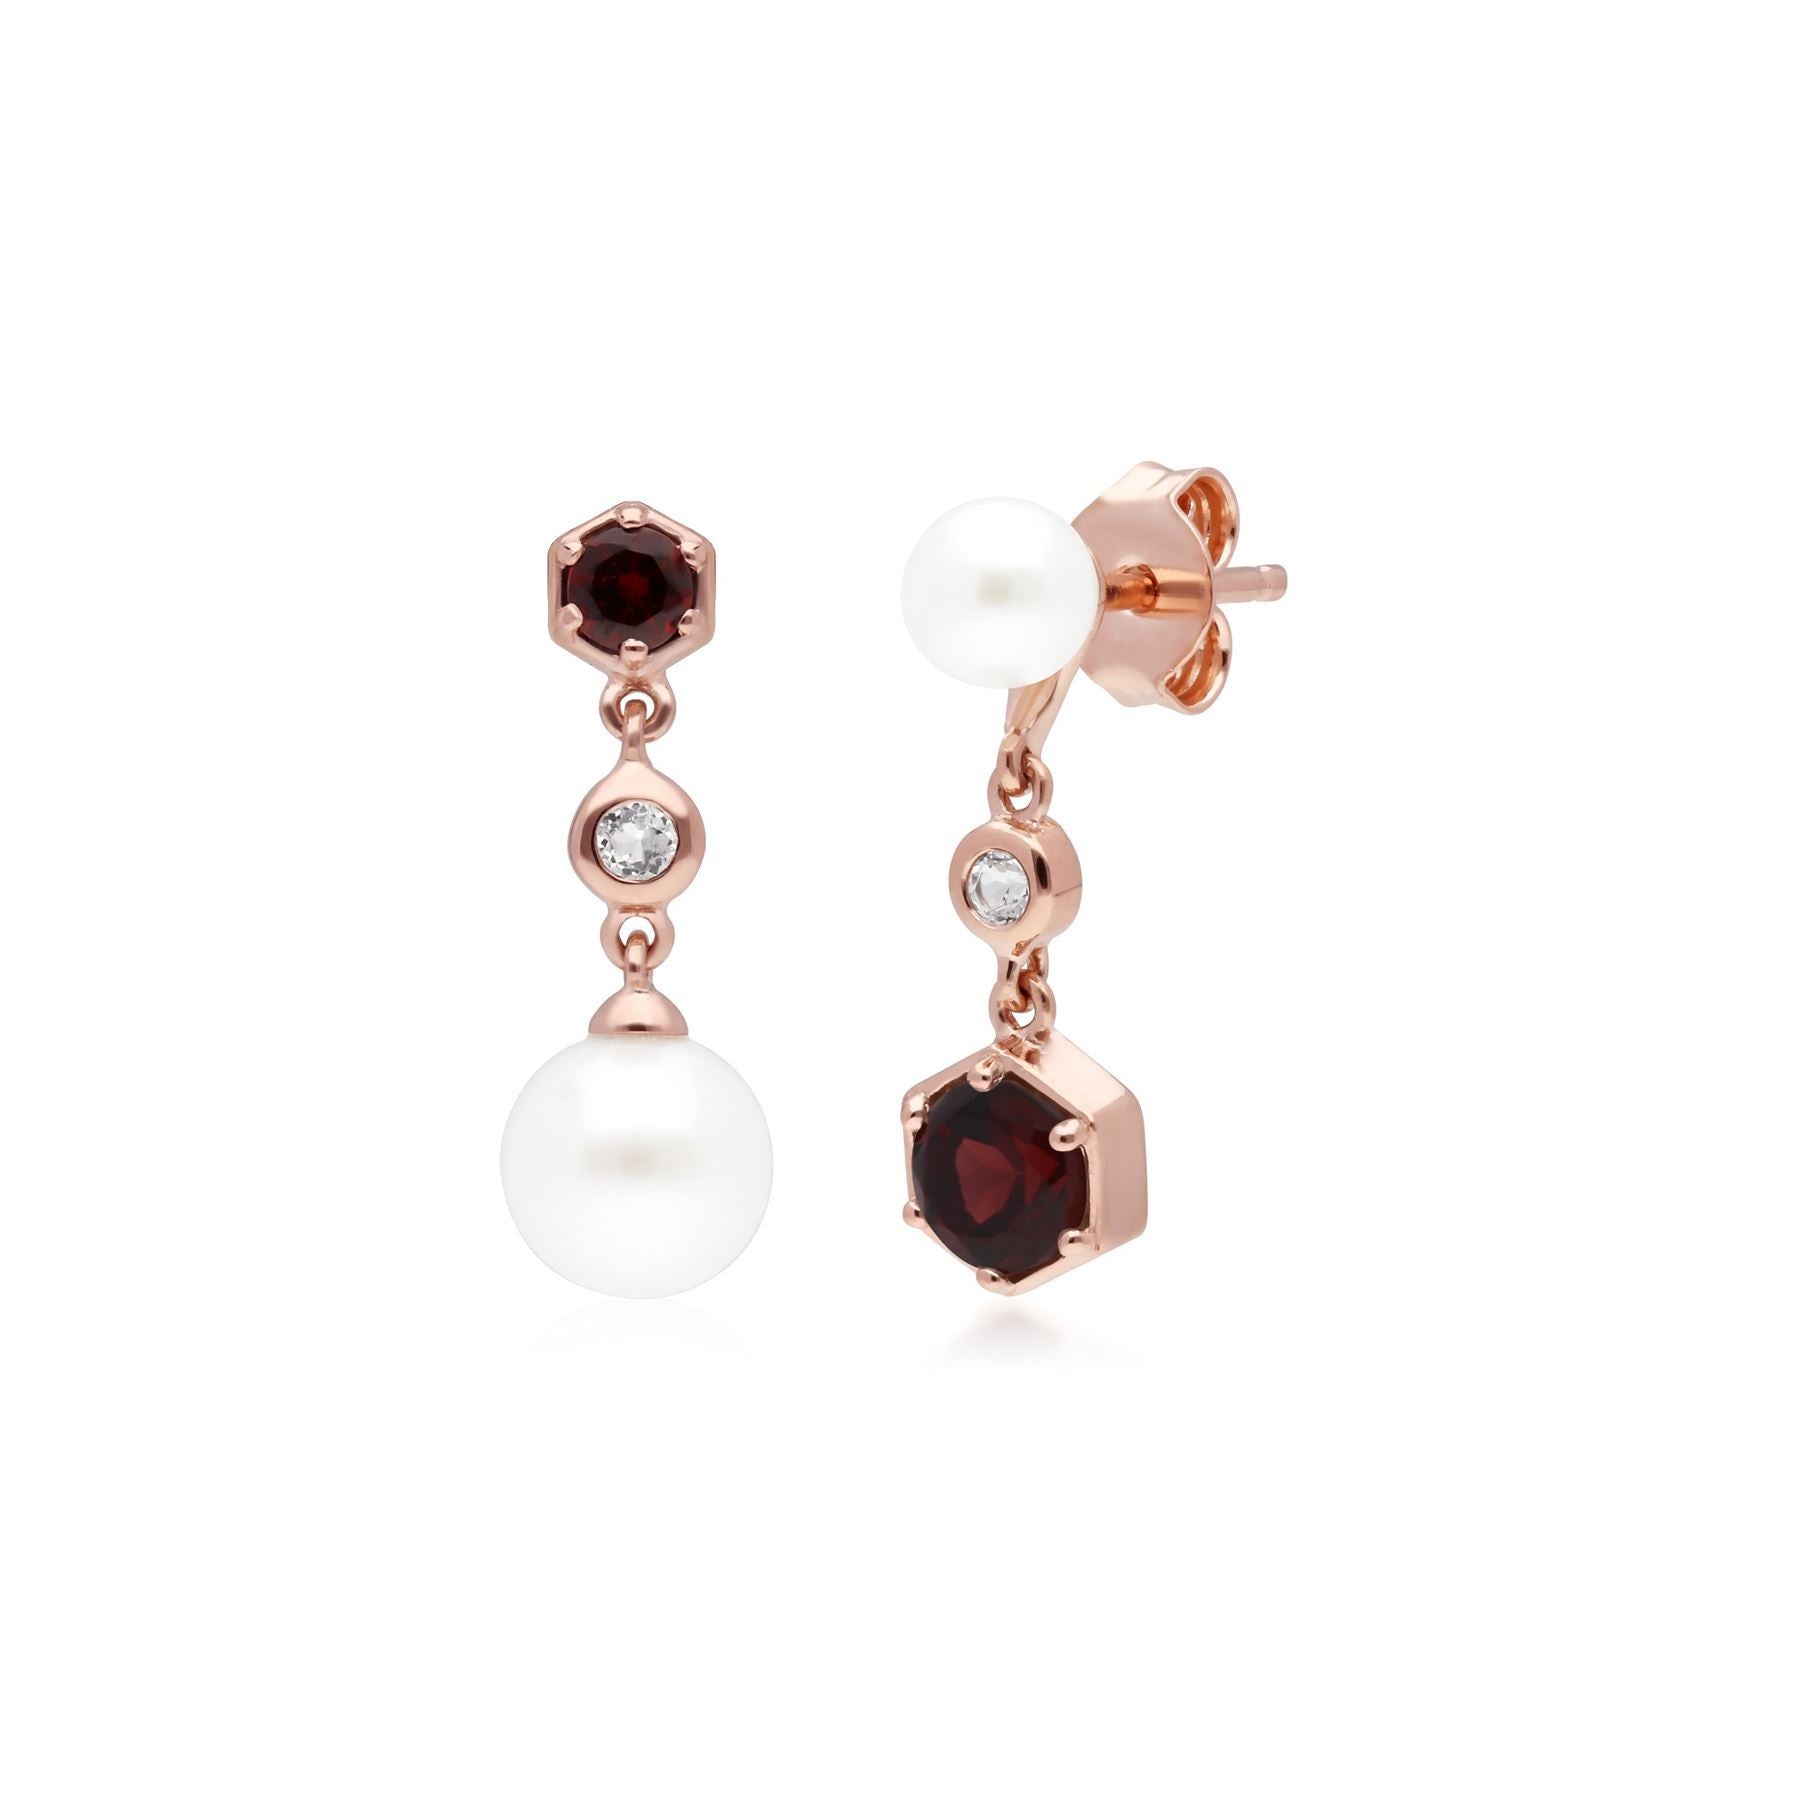 Modern Pearl, Garnet & Topaz Mismatched Drop Earrings in Rose Gold Plated Sterling Silver